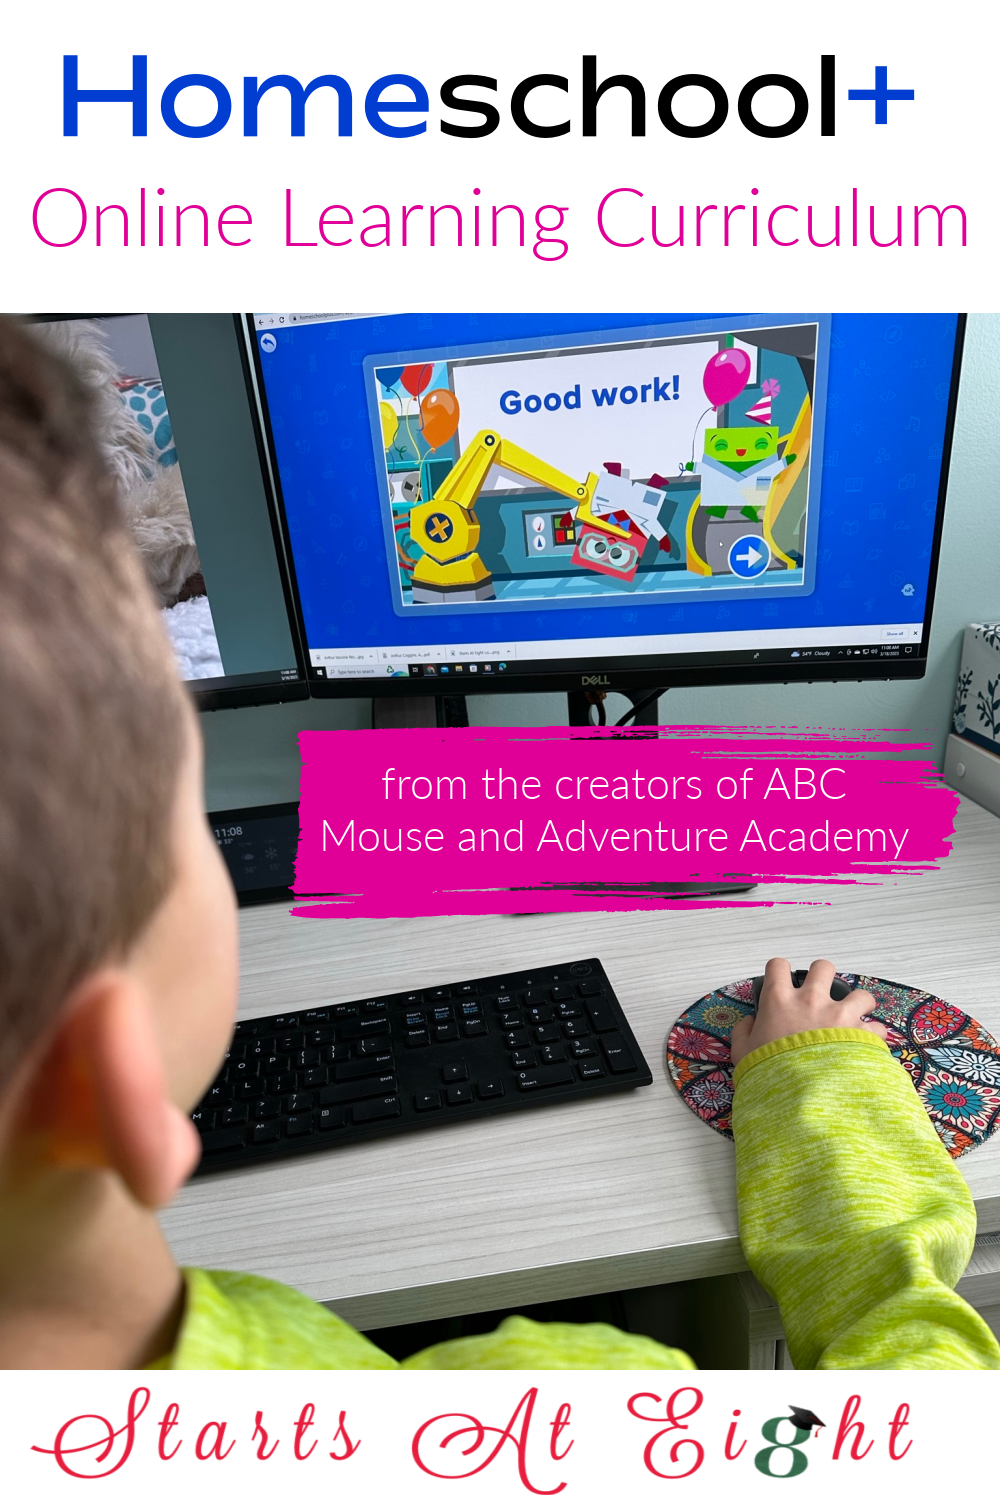 Homeschool+ Online Learning Curriculum from the makers of ABC Mouse and Adventure Academy is a complete homeschool curriculum for PreK-2nd grade.